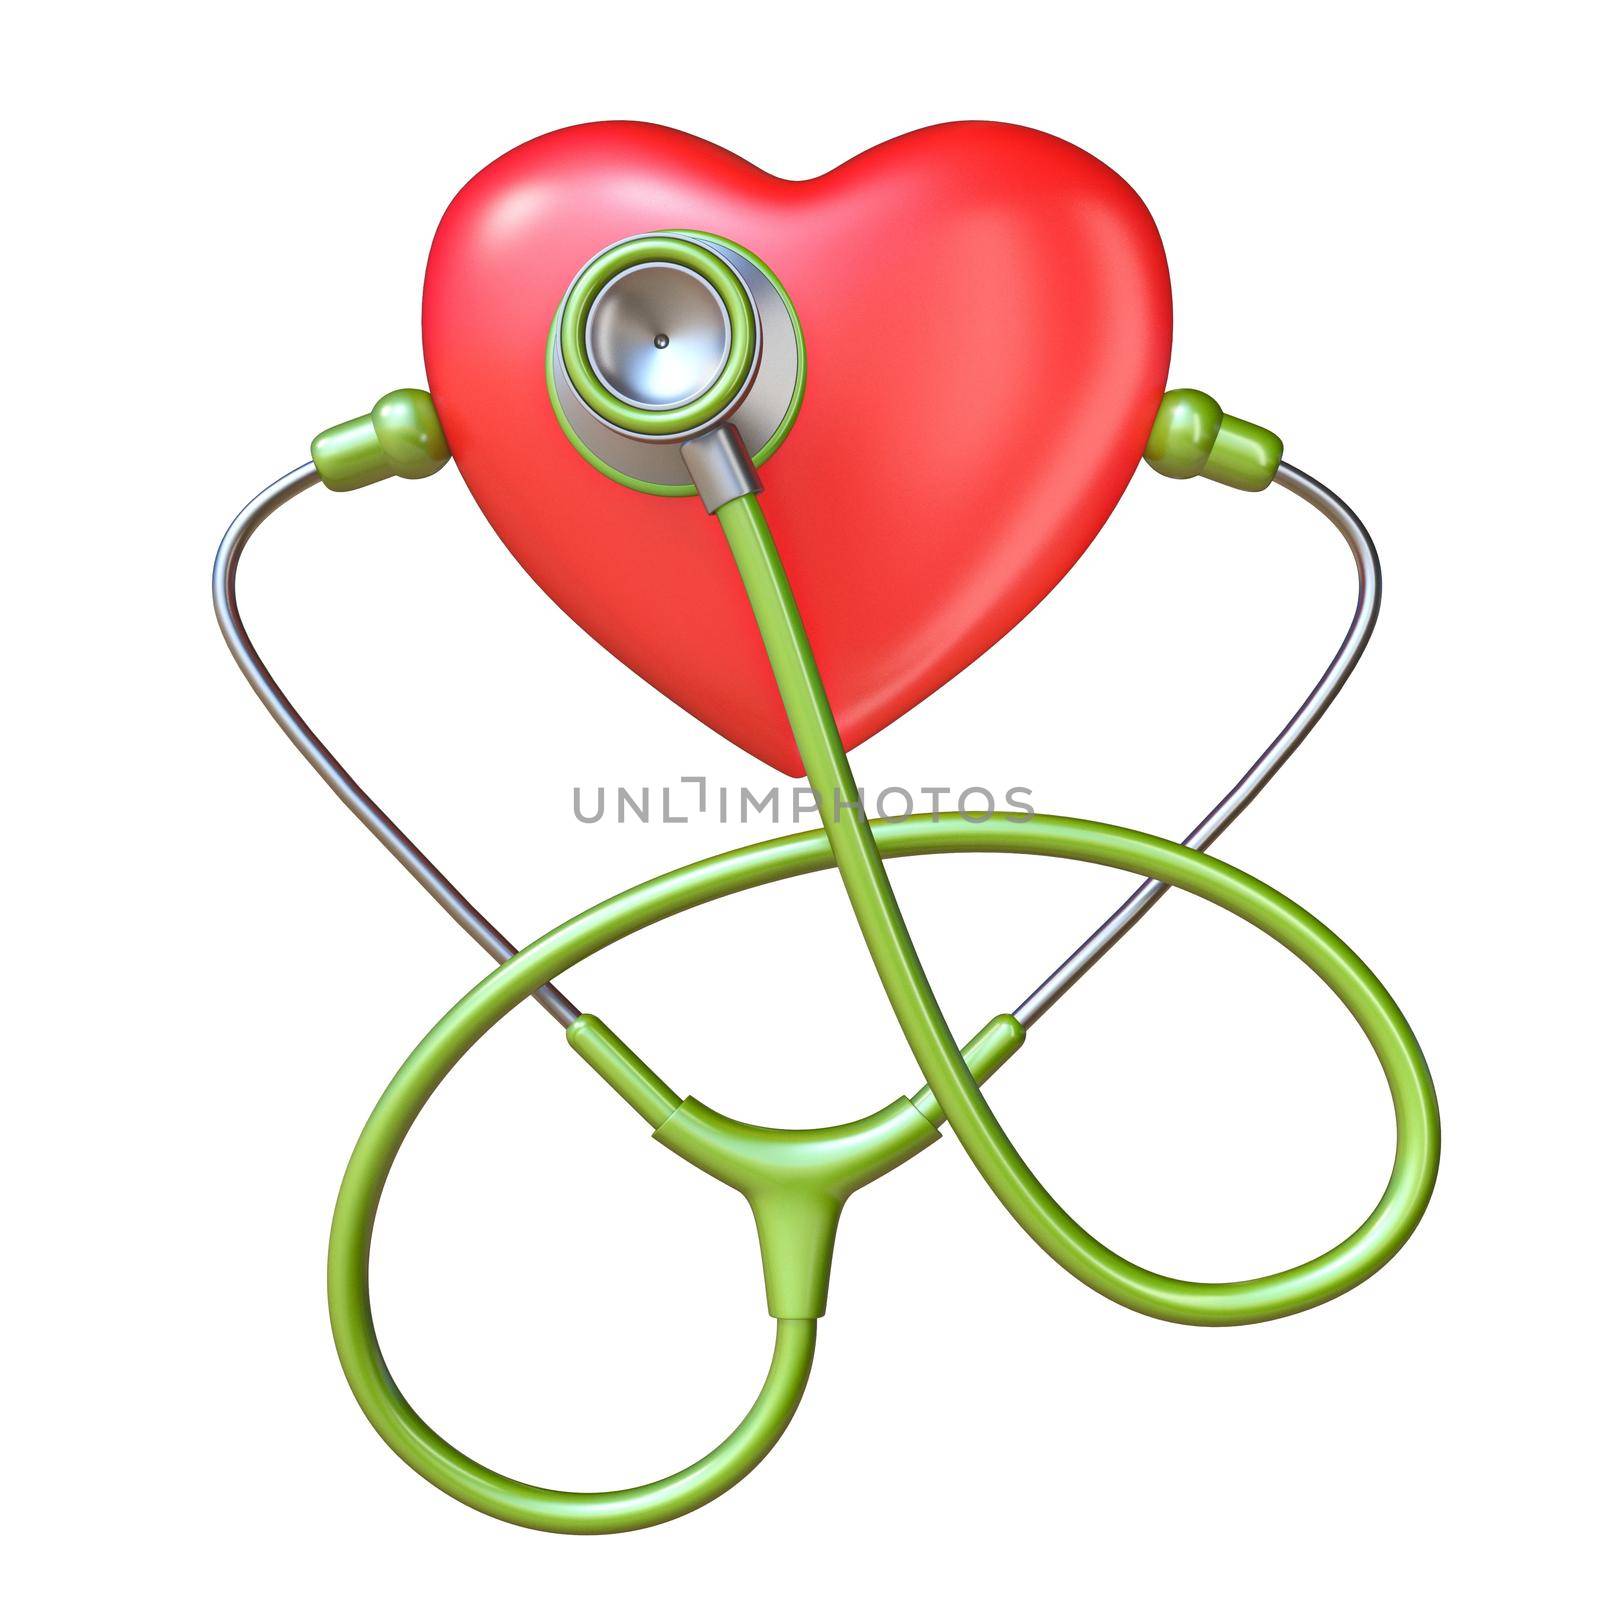 Stethoscope and red heart 3D render illustration isolated on white background